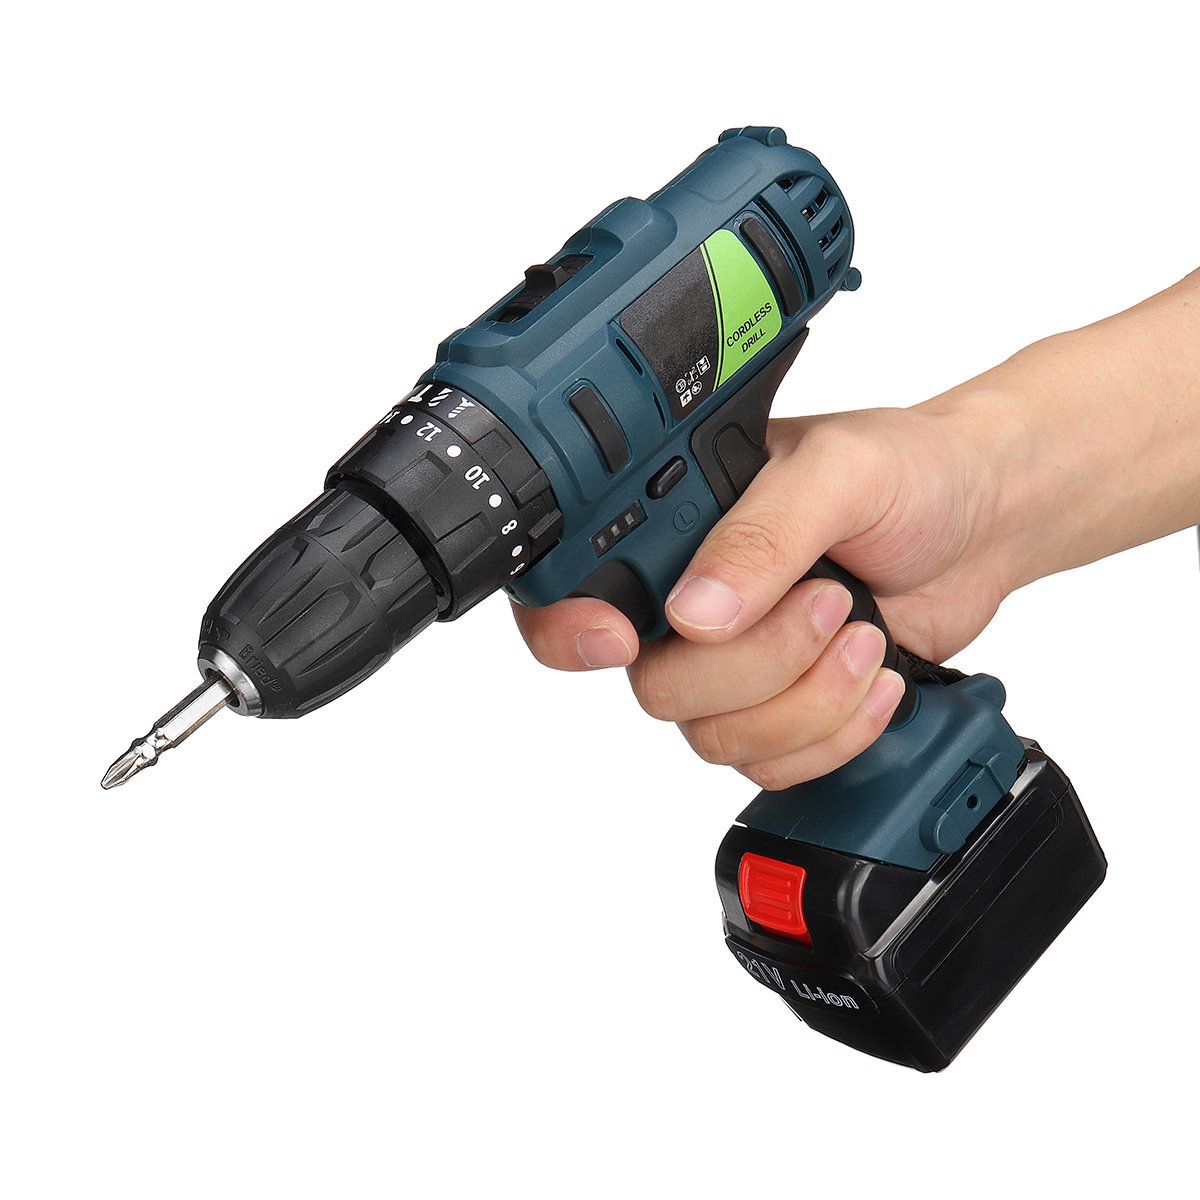 Adjustable-21V-Rechargeable-Cordless-Power-Impact-Drill-Electric-Screwdriver-with-2-Li-ion-Battery-1354629-4